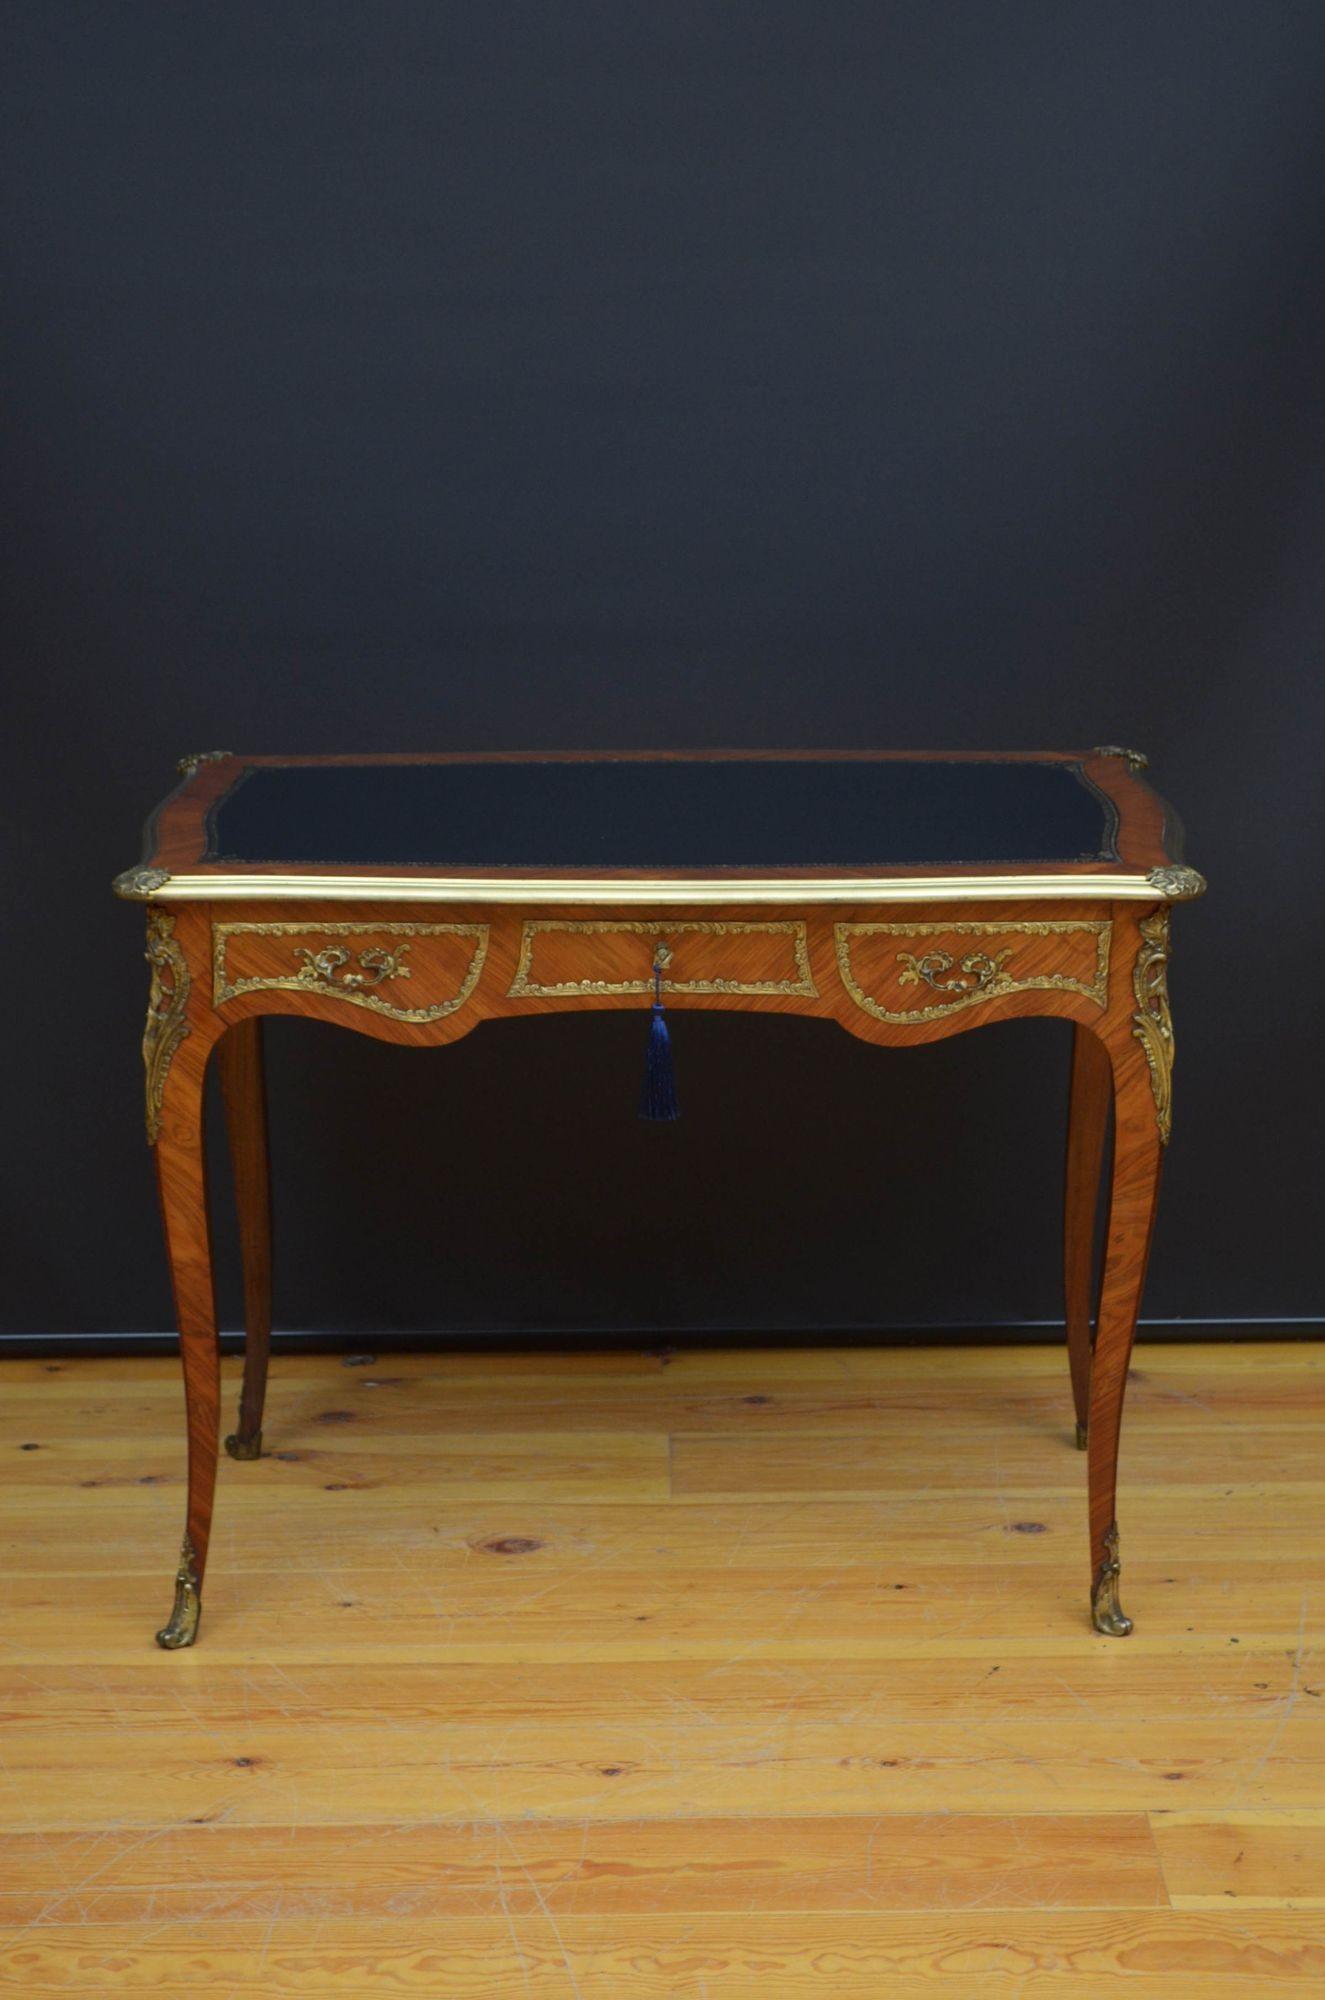 Sn5472 Outstanding 19th century kingwood and ormolu writing desk, having new black tooled leather writing surface, serpentine top with brass moulding to the edge and decorative corners above long frieze drawer fitted with original working lock, key